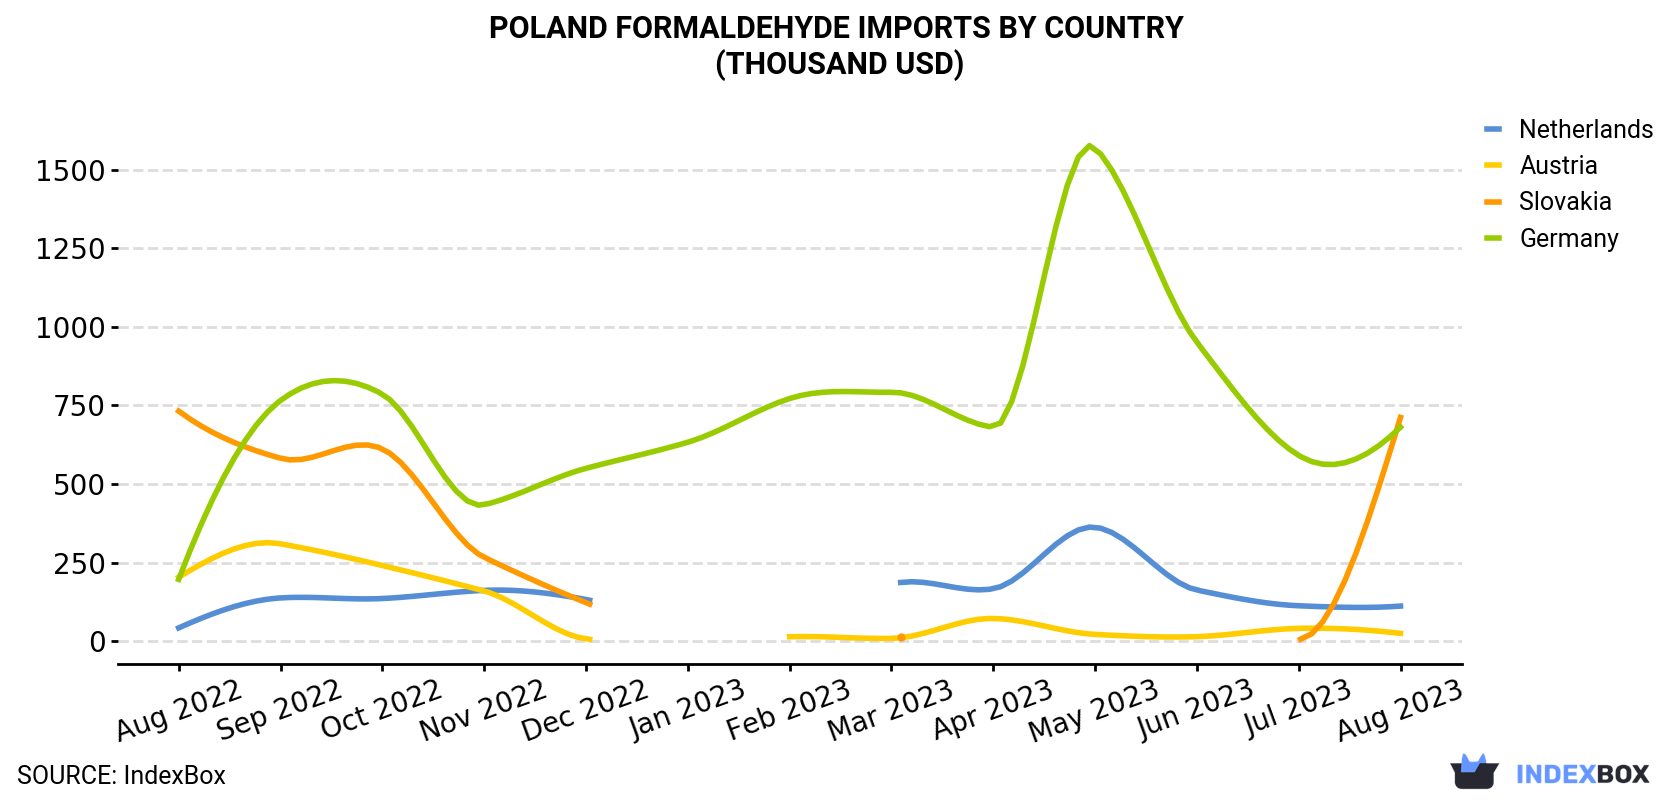 Poland Formaldehyde Imports By Country (Thousand USD)